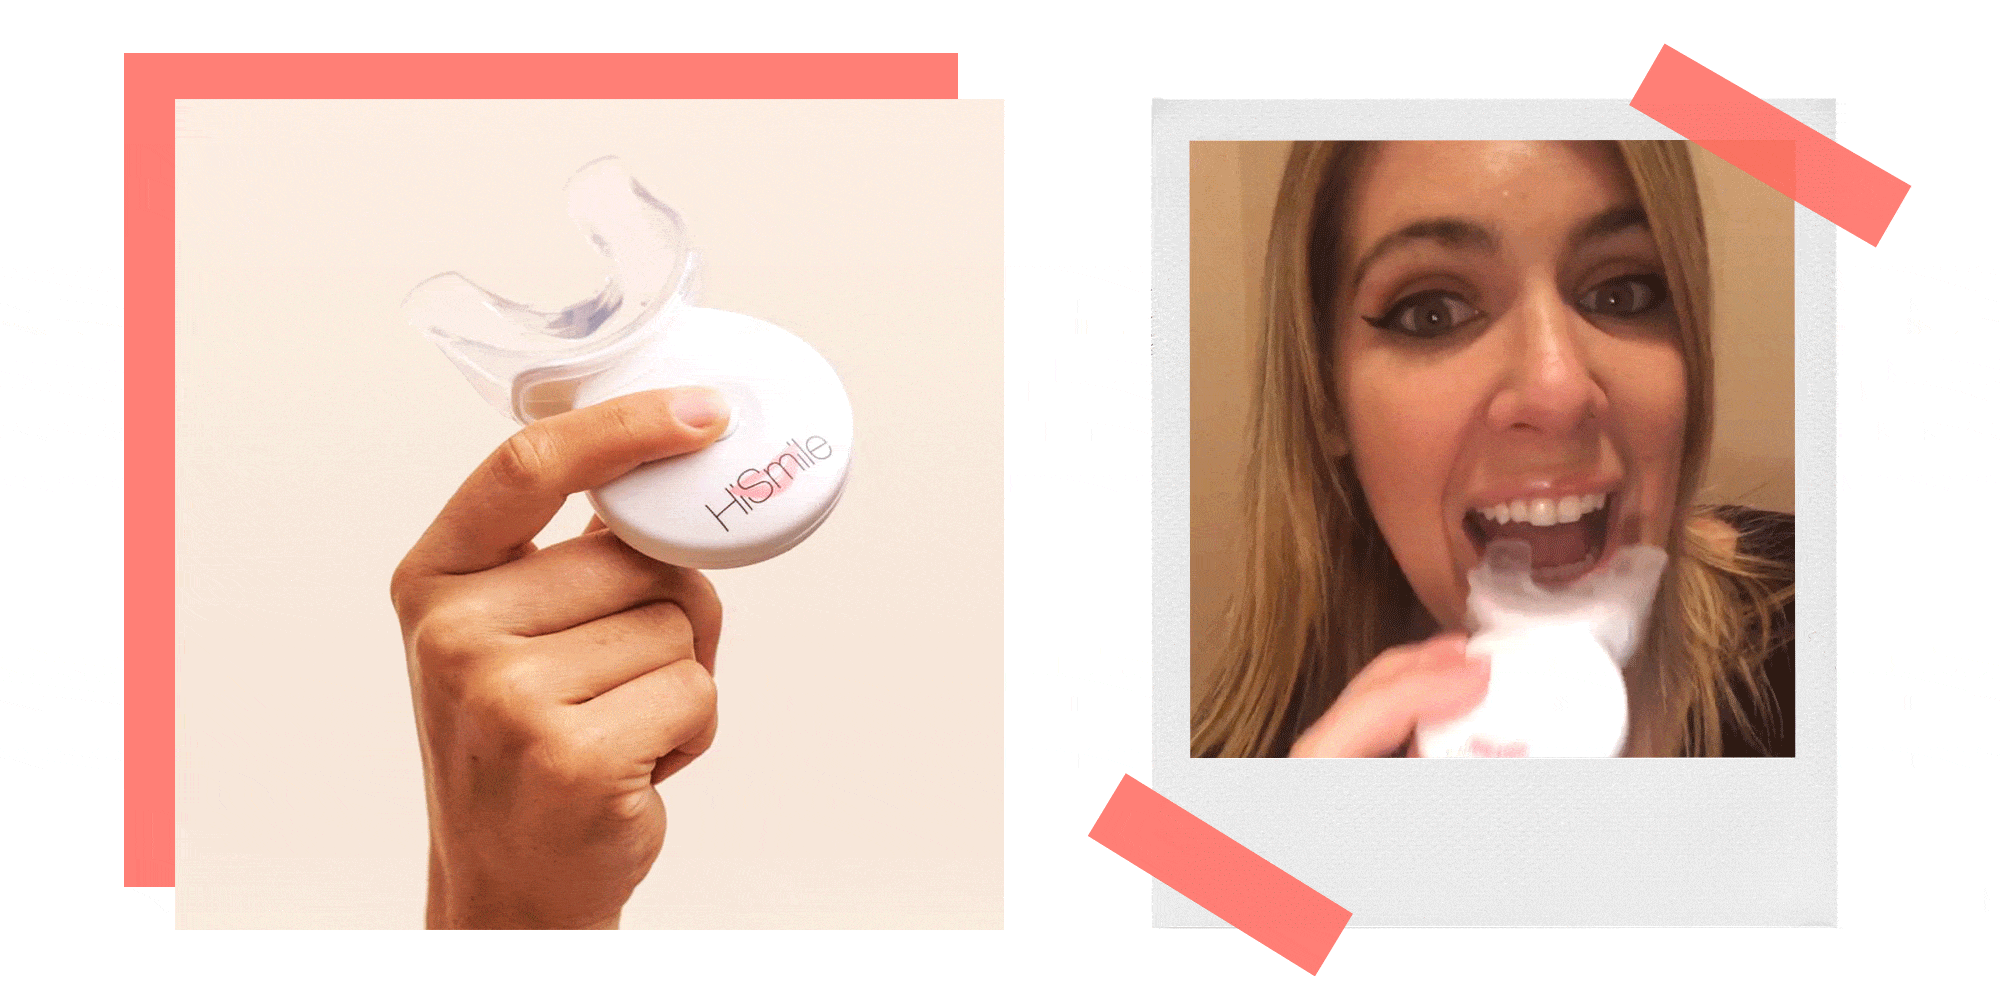 Does HiSmile Really Work? I Tried the Teeth Whitening Kit for Myself